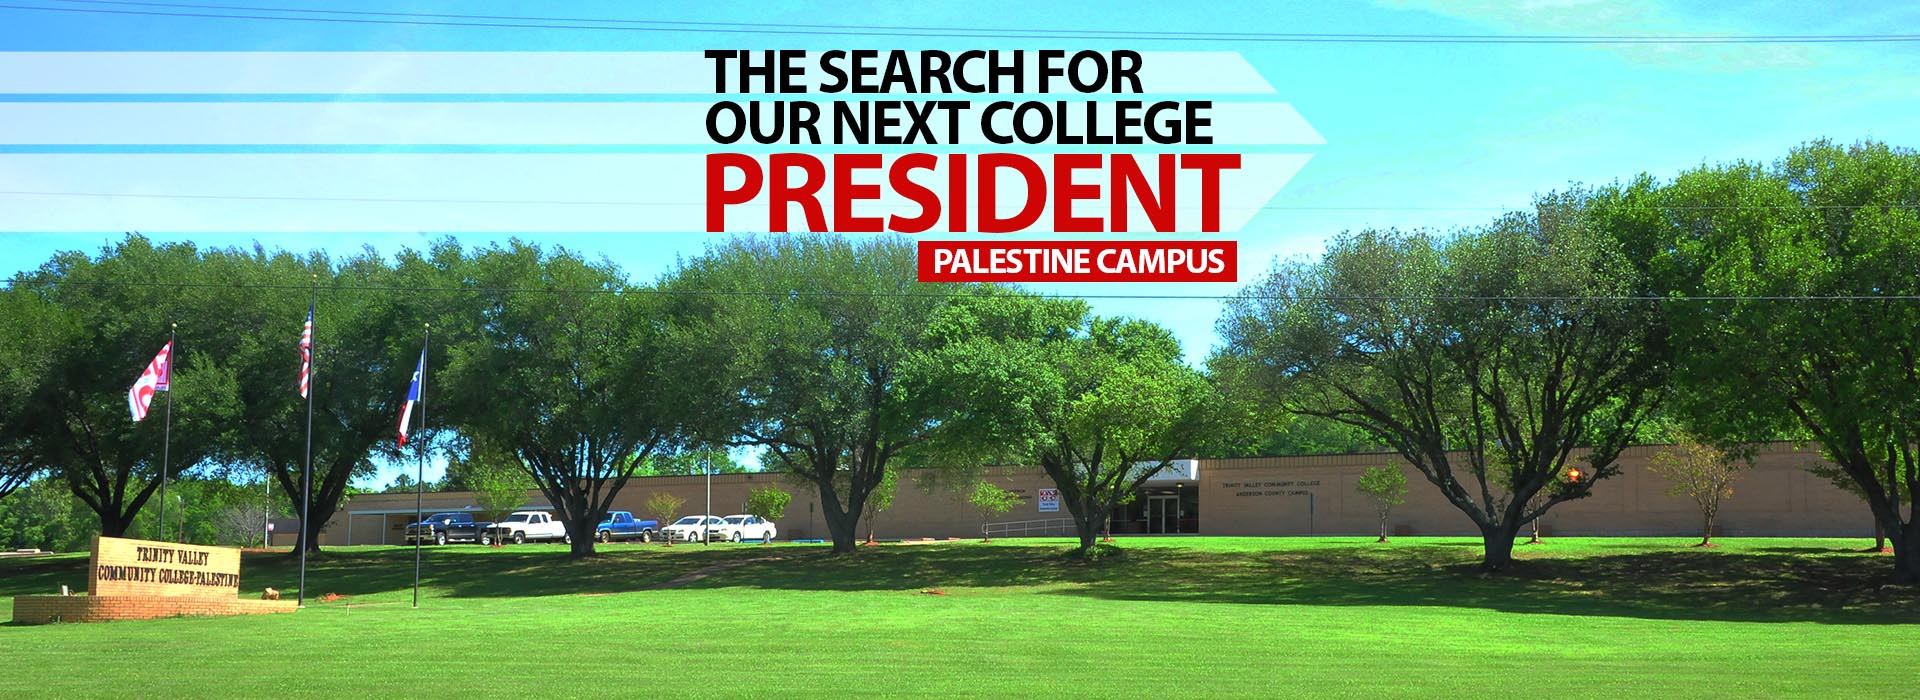 The search for our next college President - Palestine Academic Campus